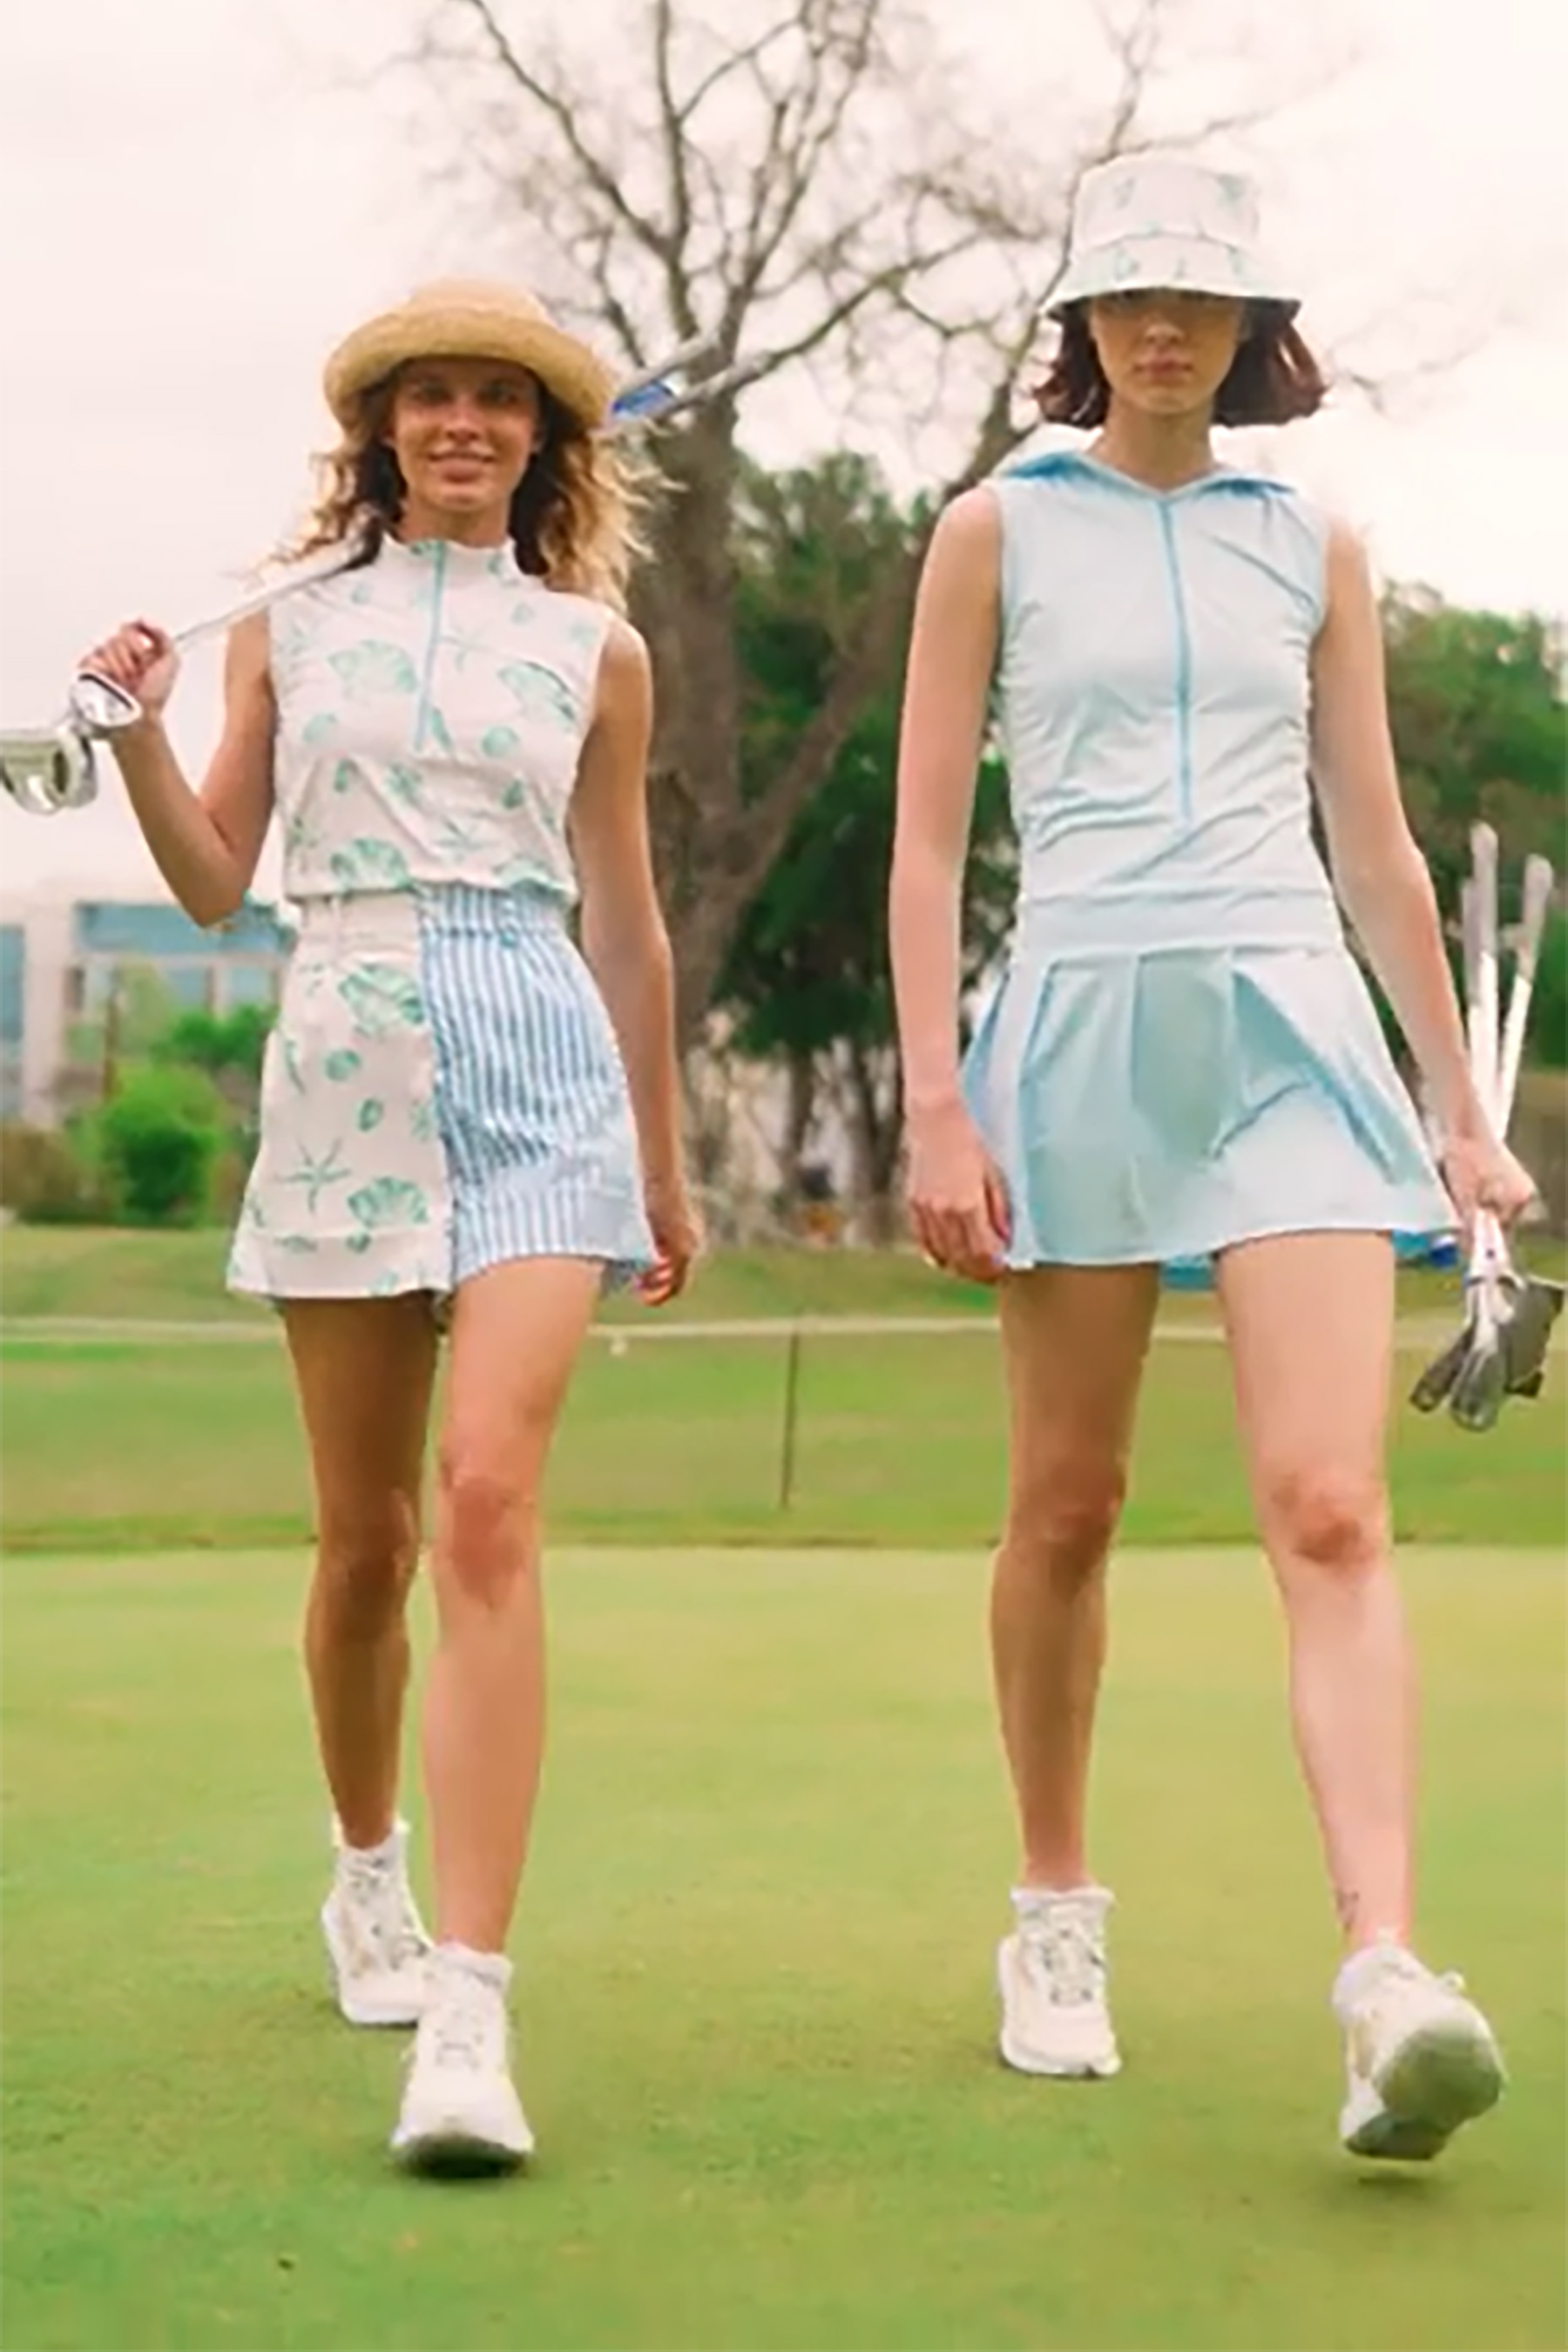 Play Video: Cole Haan And Byrdie Golf Social Wear Collaborate On Limited-Edition Women’s Golf Collection